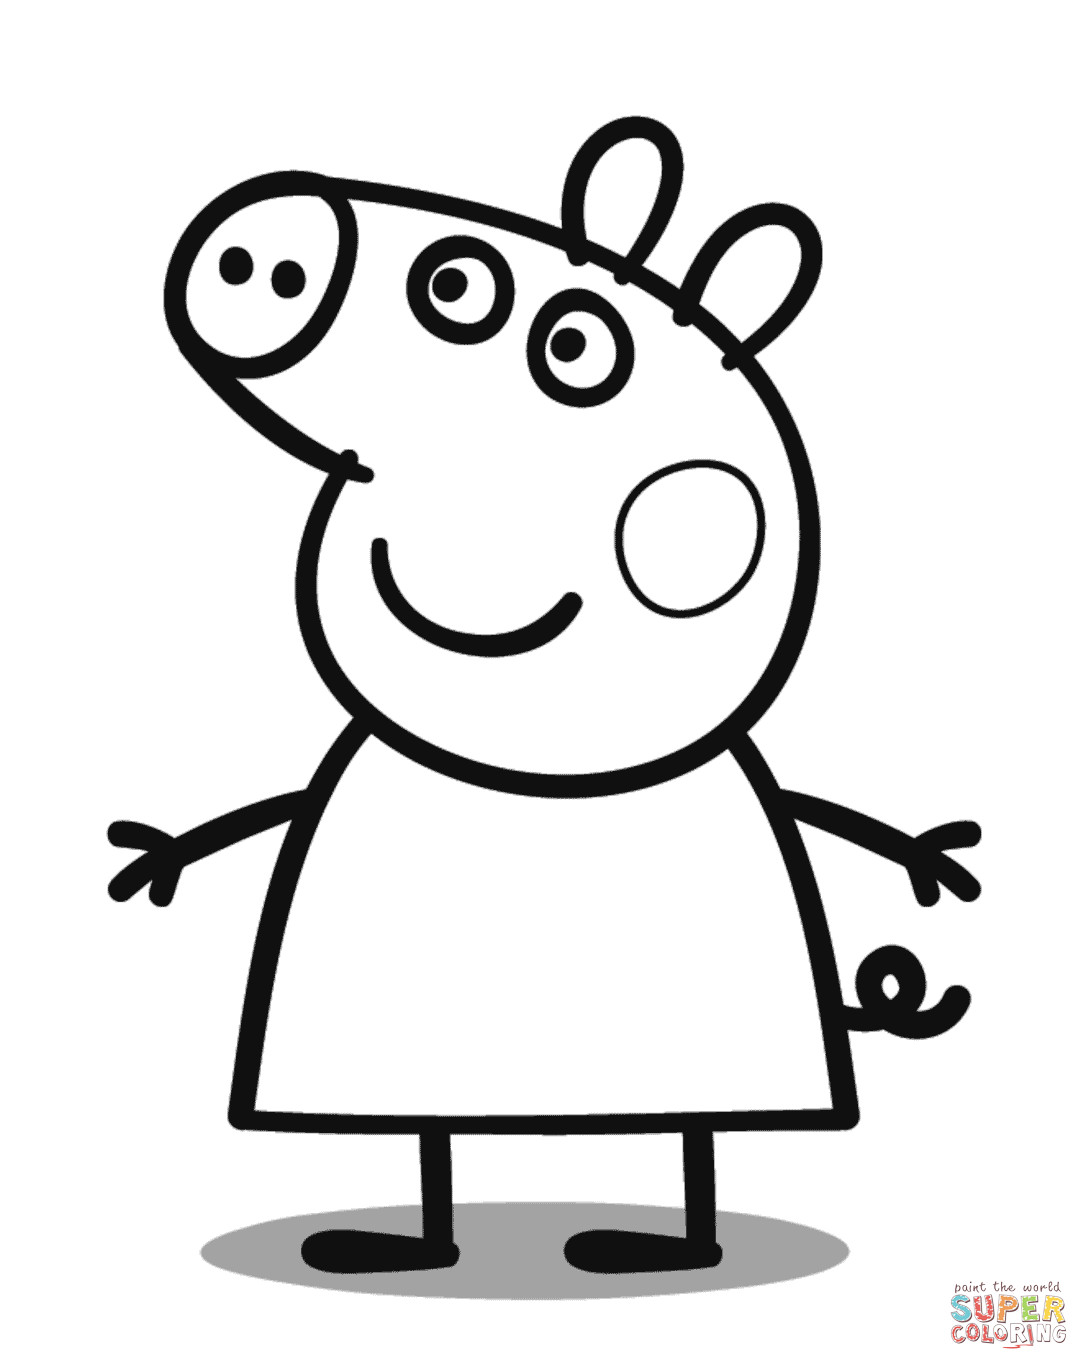 Peppa Pig Coloring Pages
 Peppa Pig coloring page